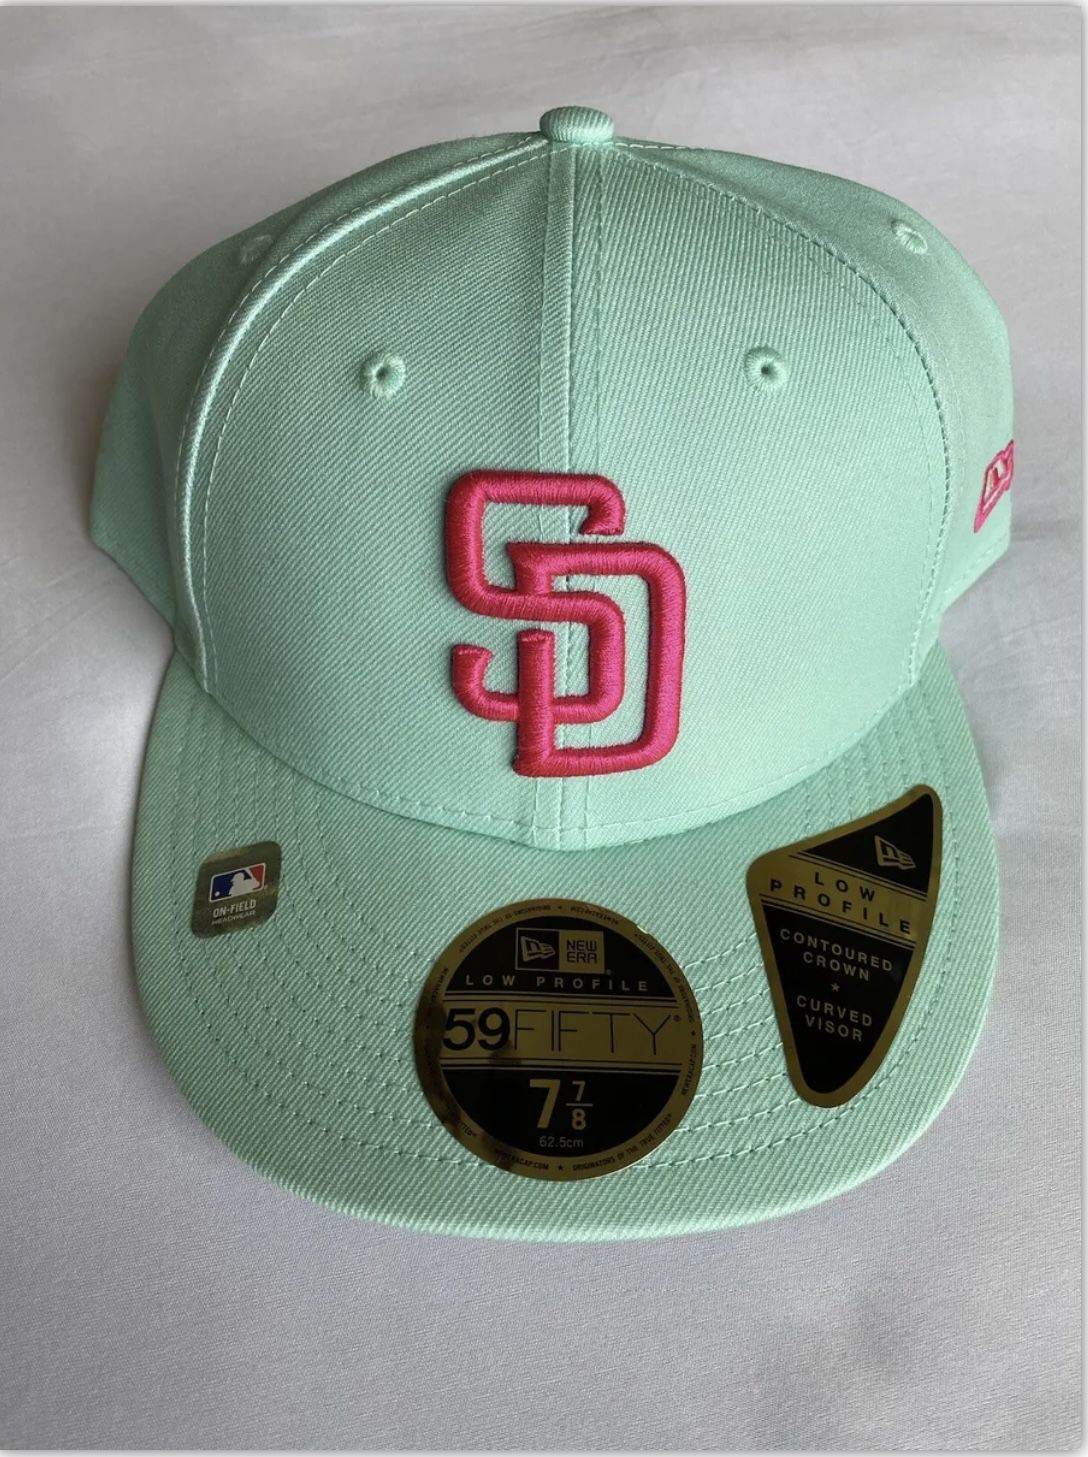 San Diego Padres CITY CONNECT ONFIELD Hat by New Era